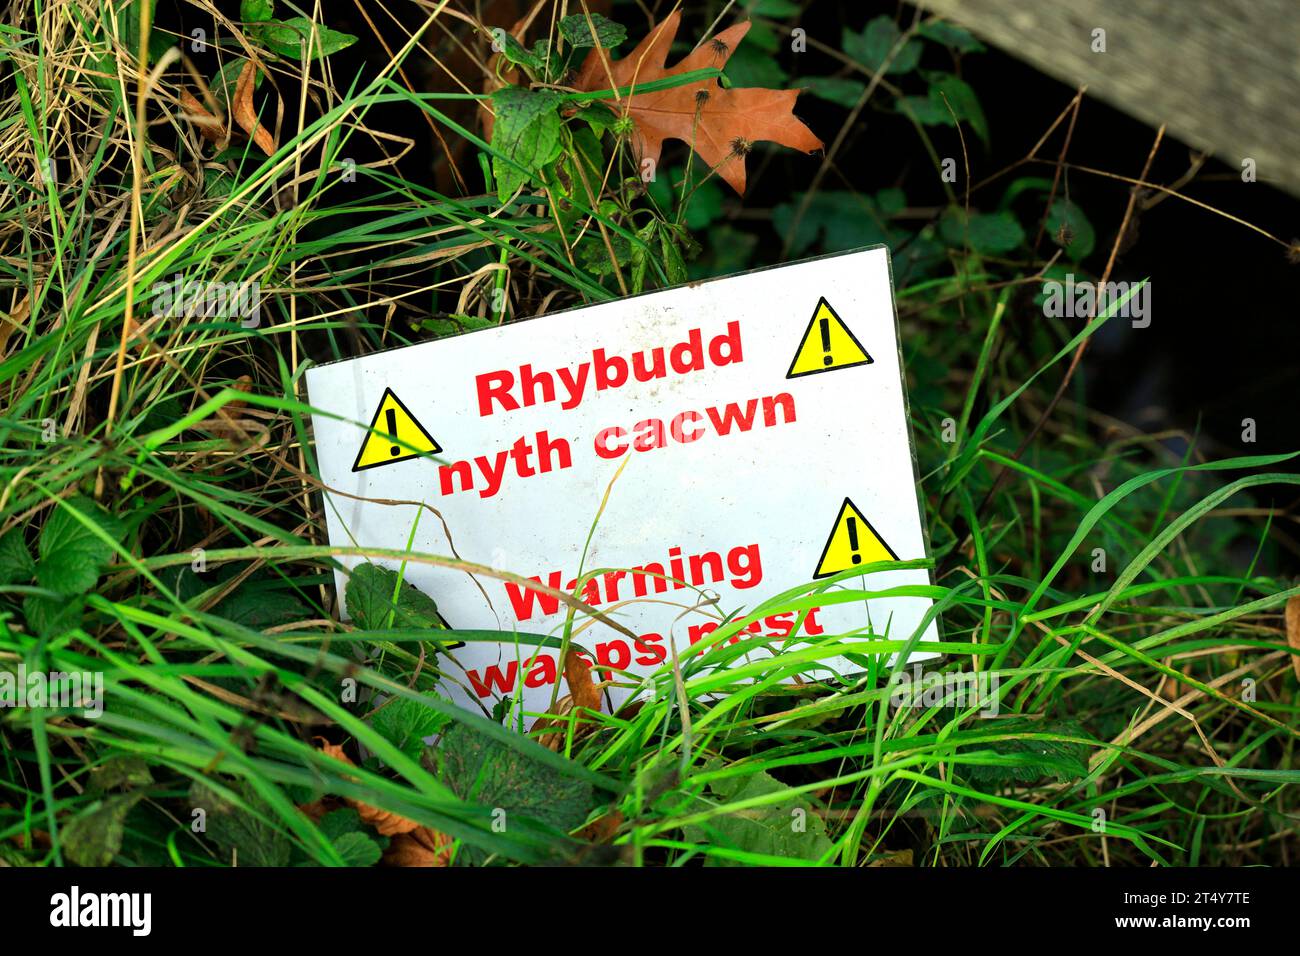 Warning sign in Welsh and English of wasps nest, Bute Park, Cardiff. Stock Photo